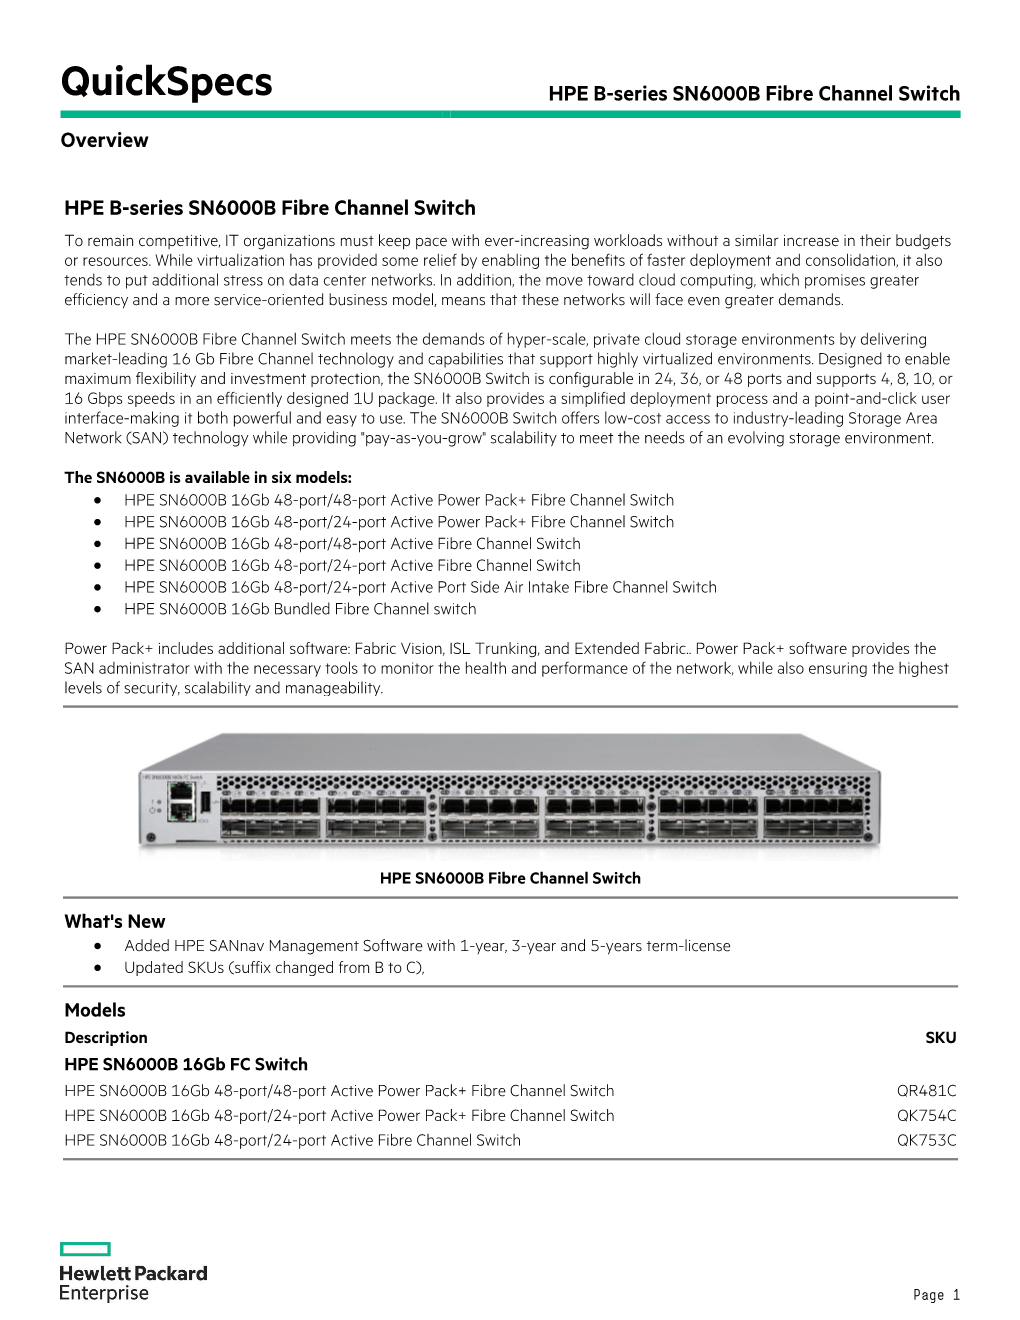 HPE B-Series SN6000B Fibre Channel Switch Overview